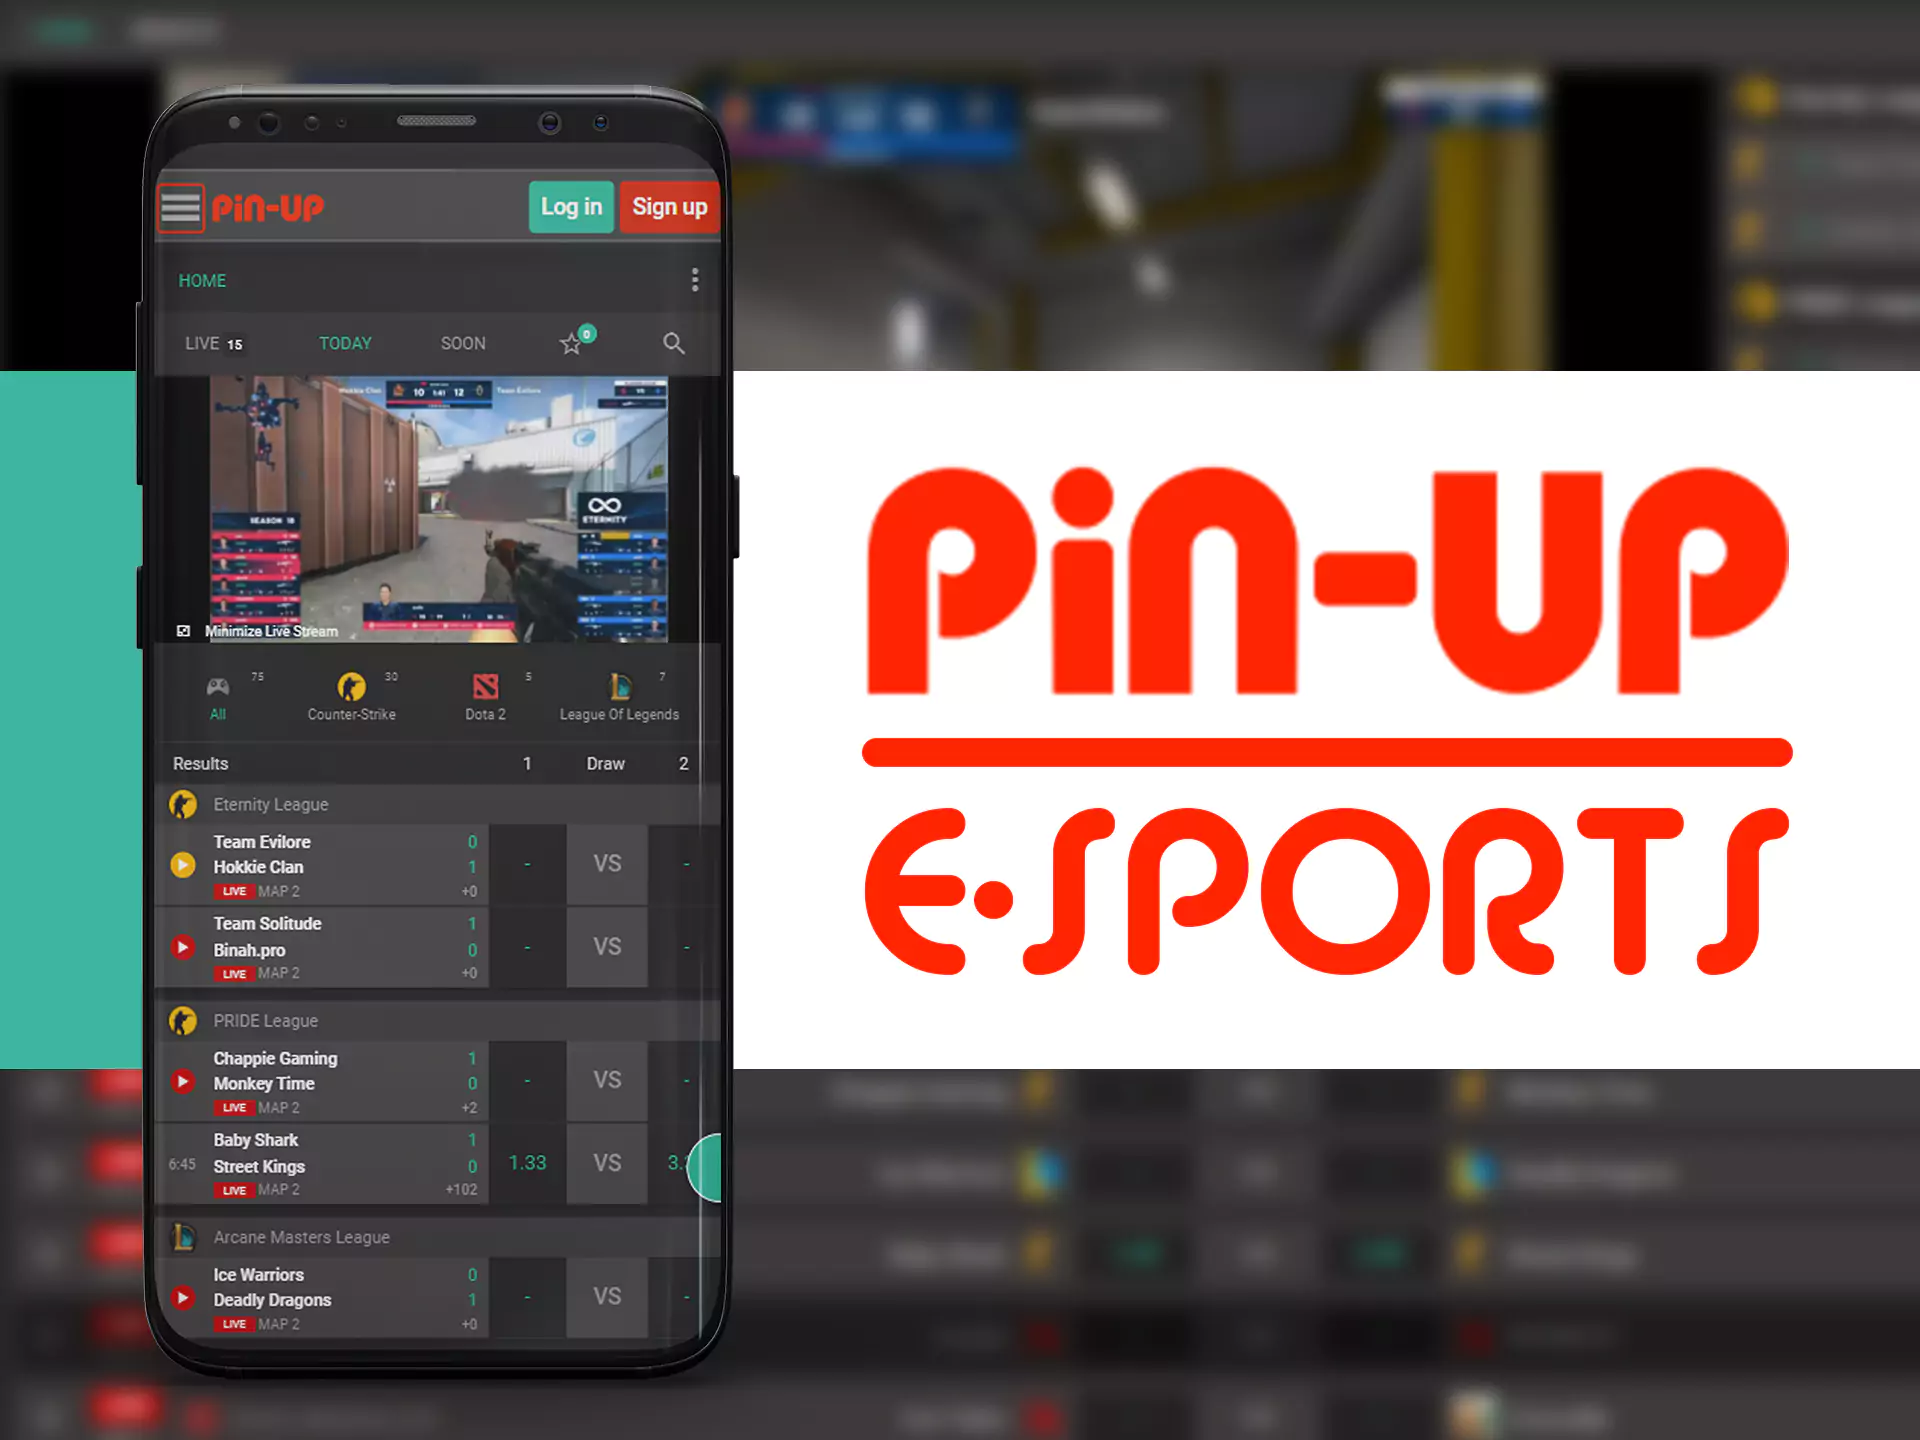 E-sports are available for betting in the Pin-Up app.